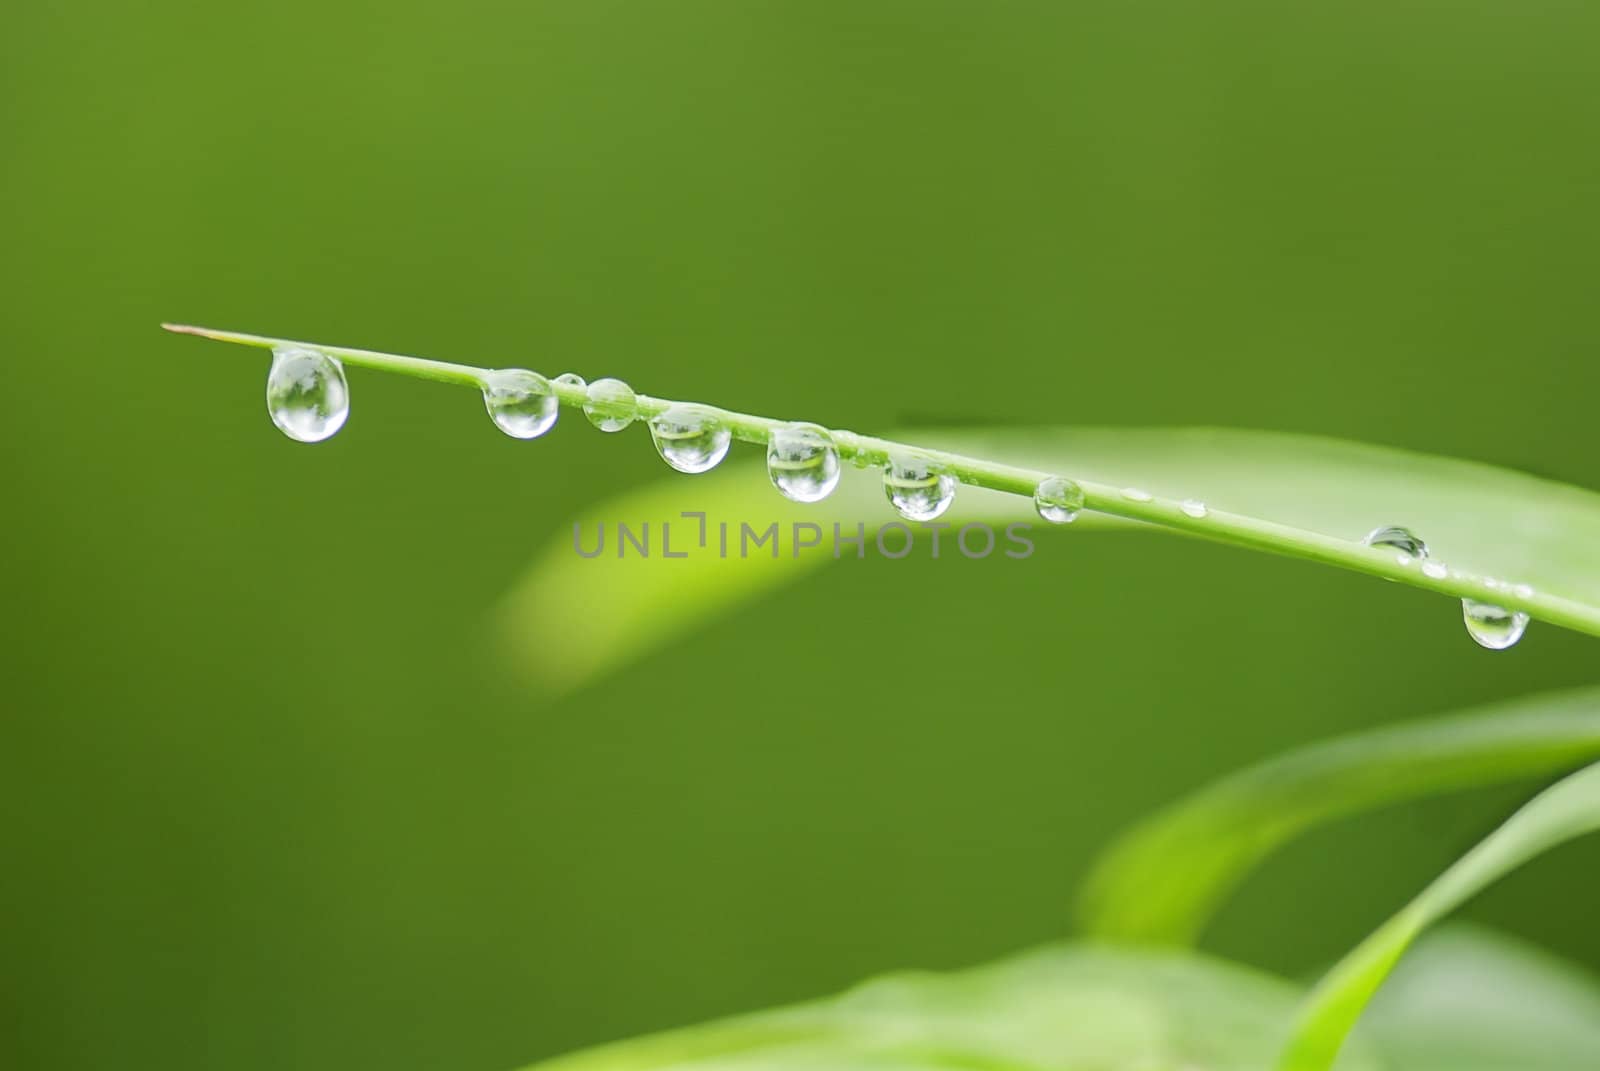 The bamboo covered with drops of water, very beautiful